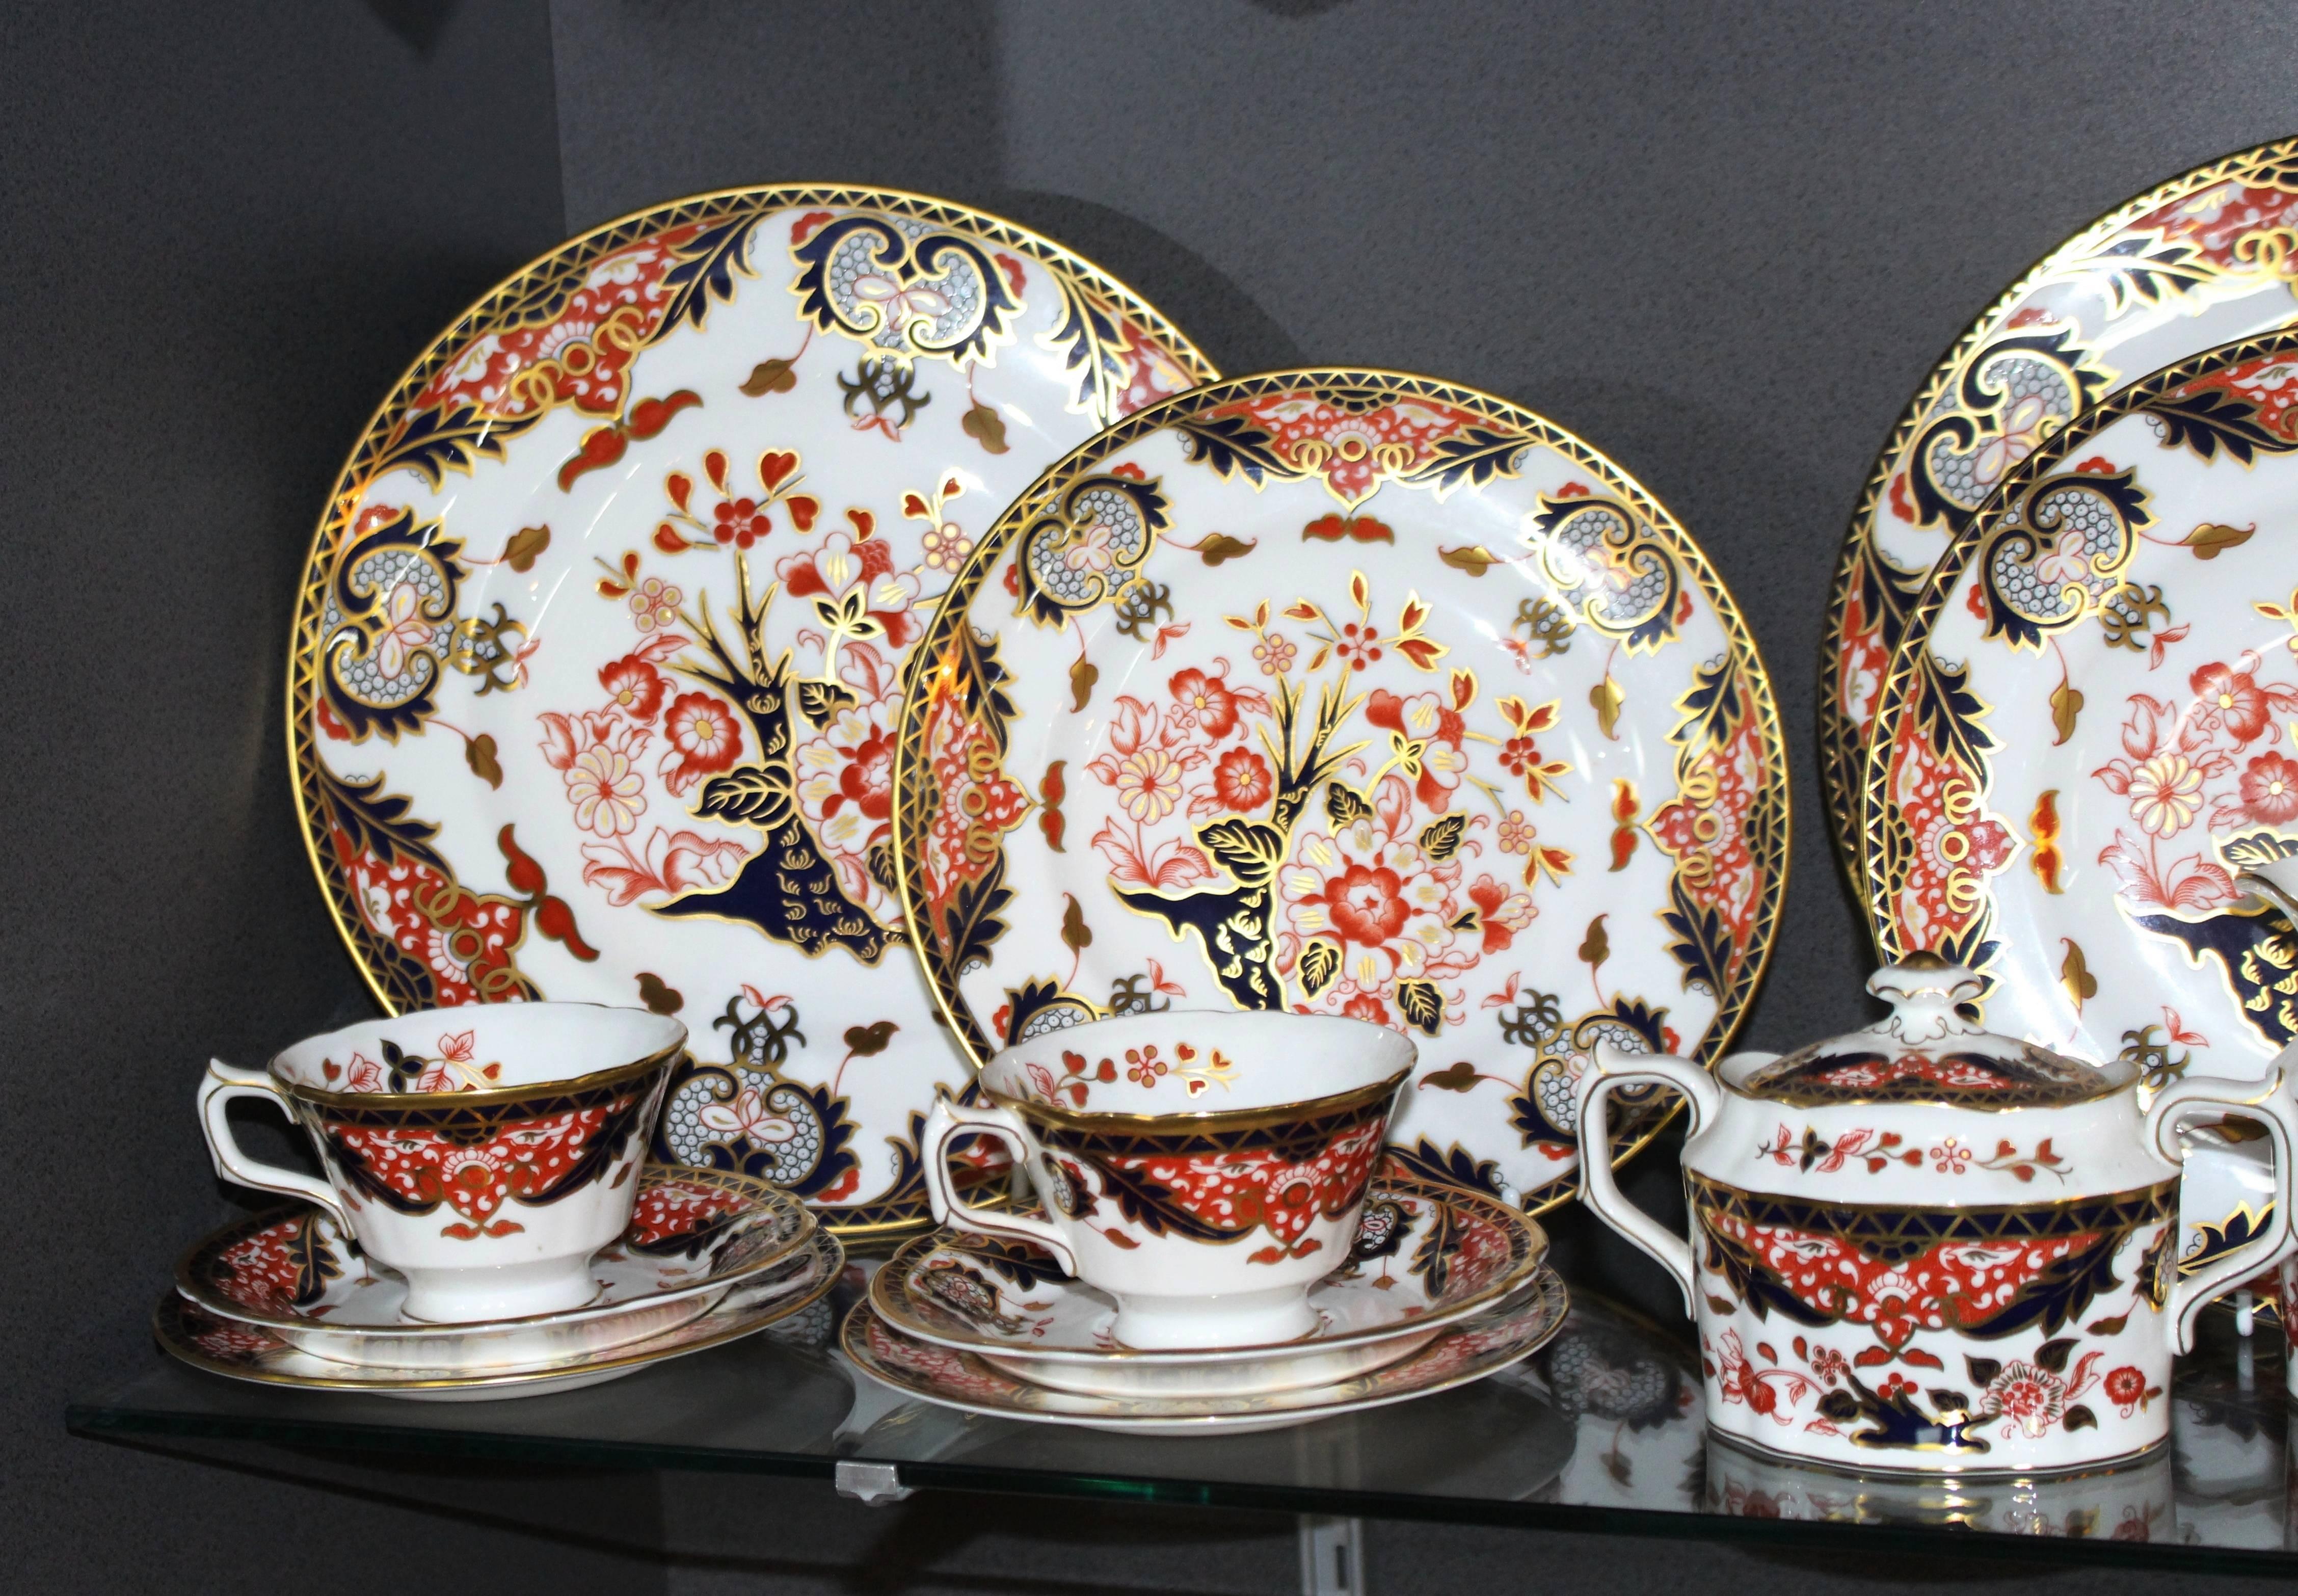 

Manufacturer Royal Crown Derby
Pattern Derby Japan
Total 32 Pieces
Pieces Everything pictured: Six dinner plates, six tea plates, six side plates, six tea saucers, five tea cups, two handled sugar bowl with lid, cream jug
Backstamp Fully